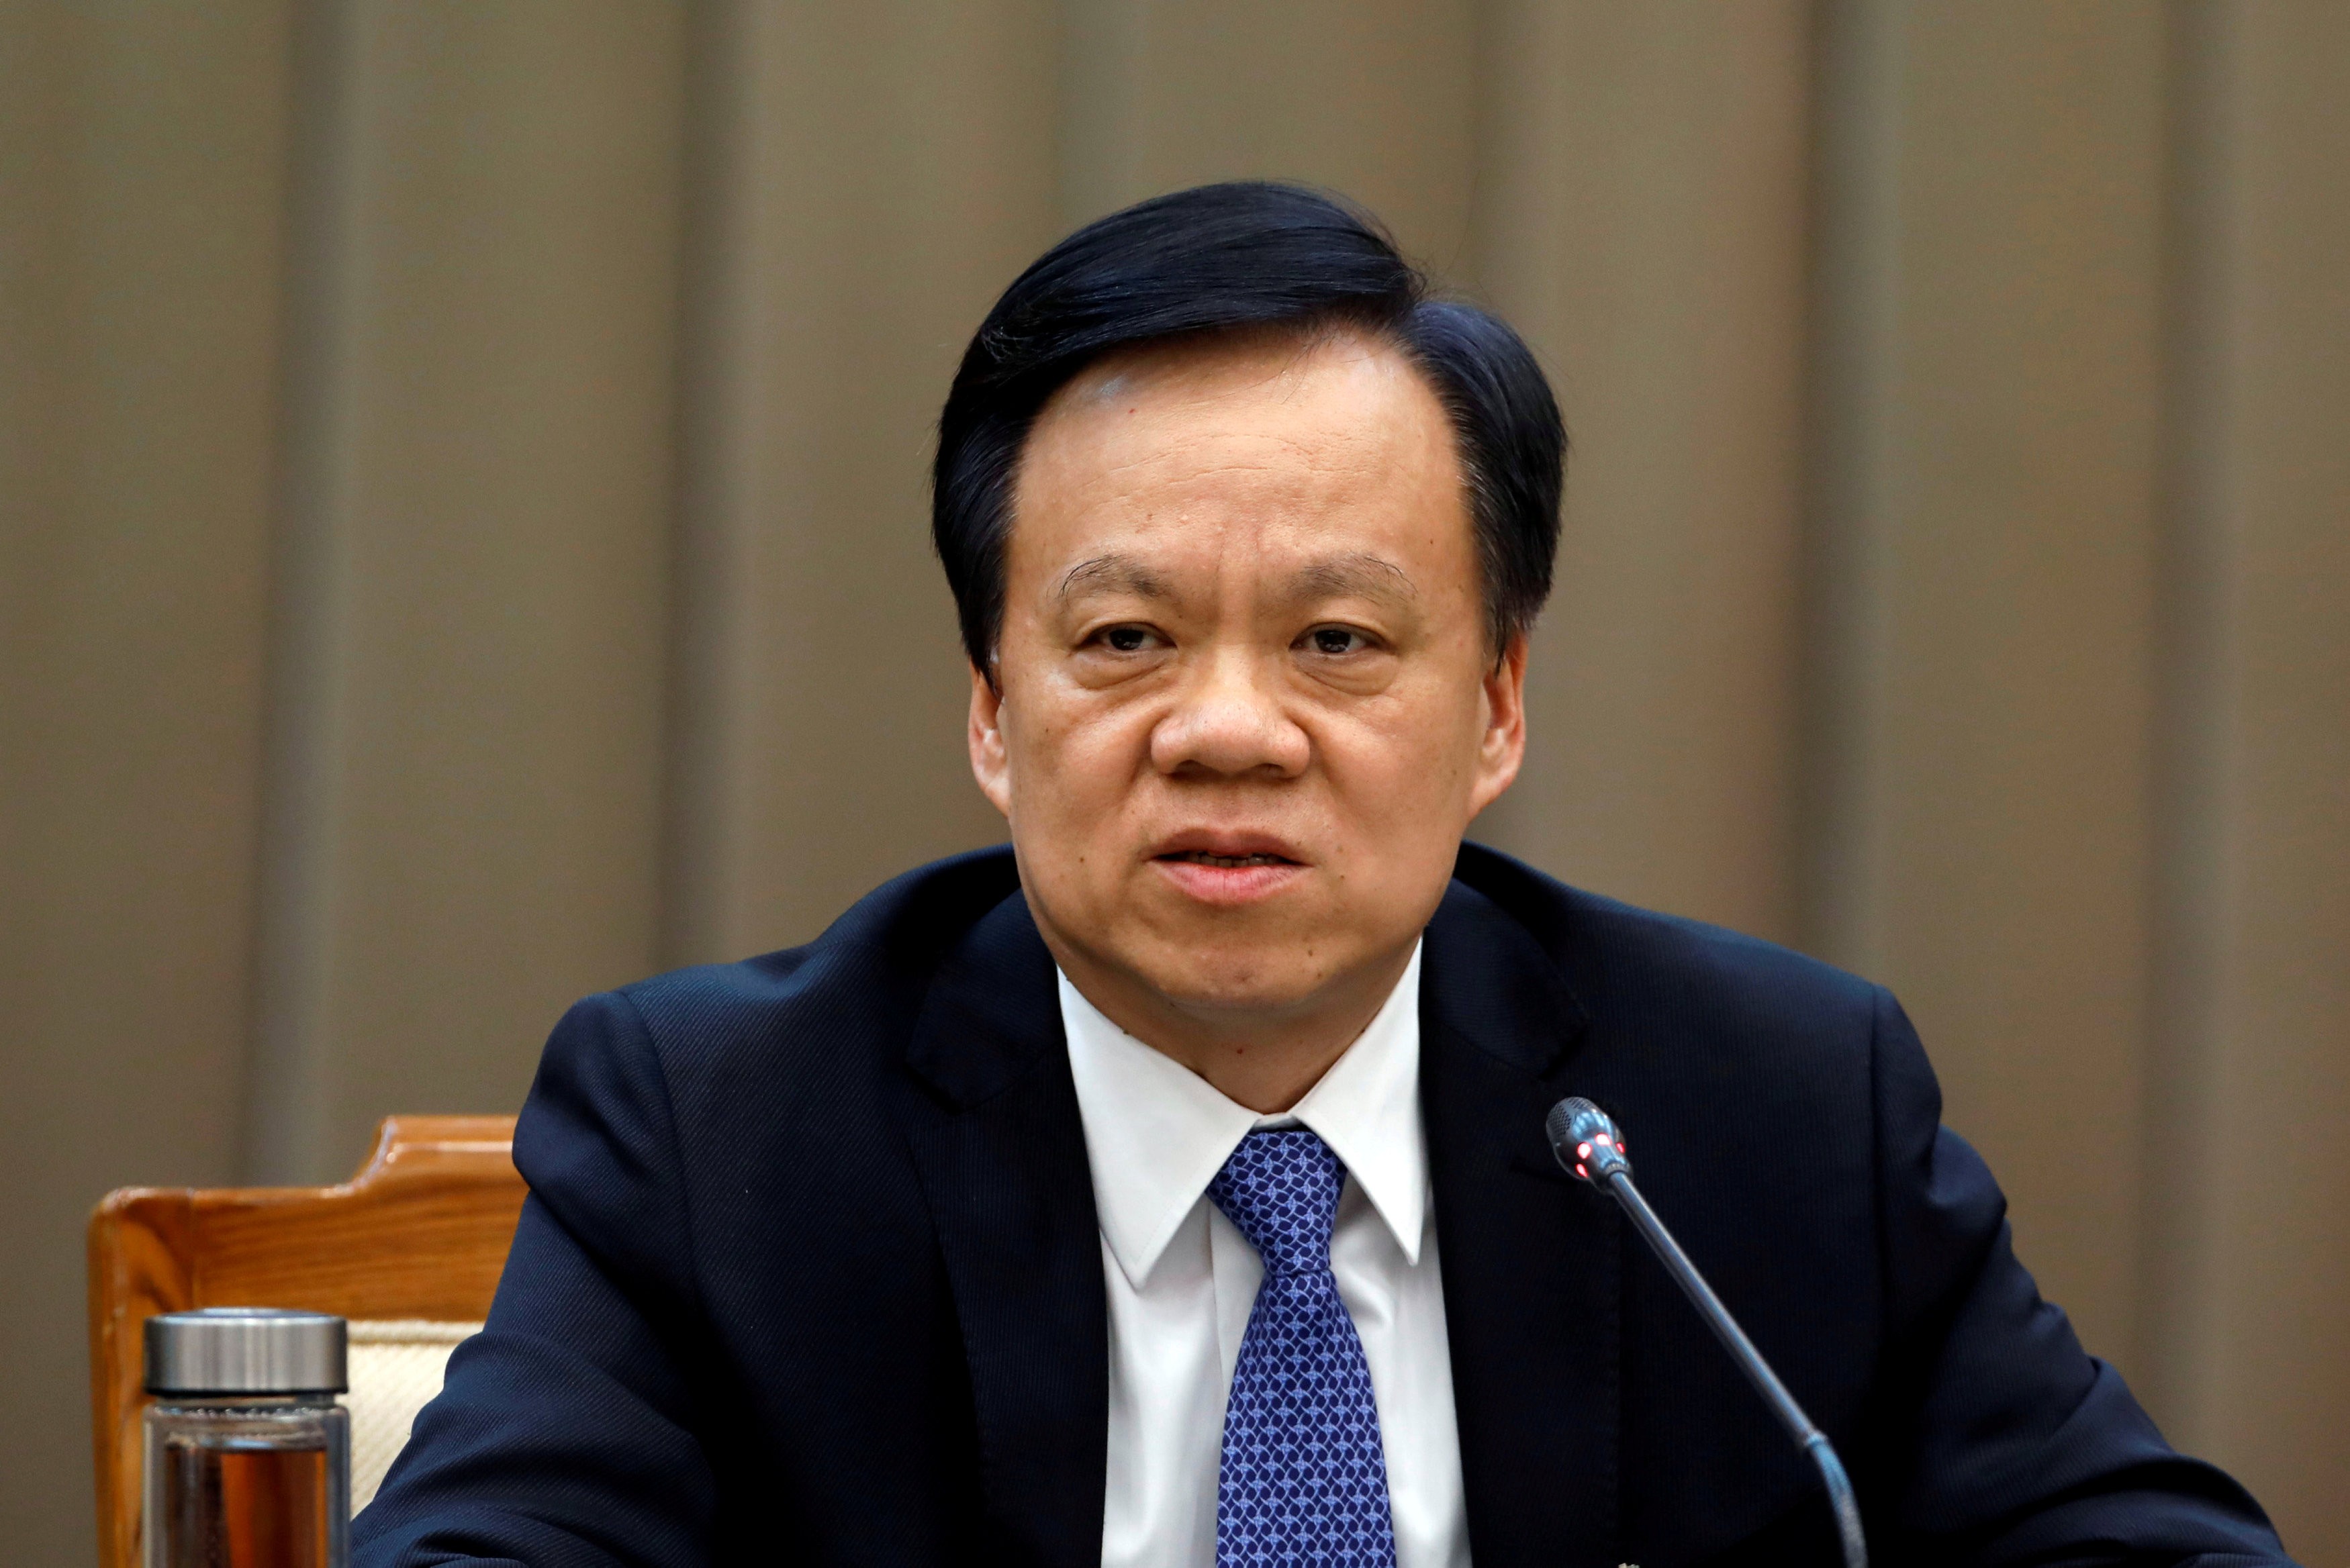 Rising star Chen Miner, seen in this file photo, has been appointed as the Communist Party boss of southwestern China’s Chongqing. Photo: Reuters